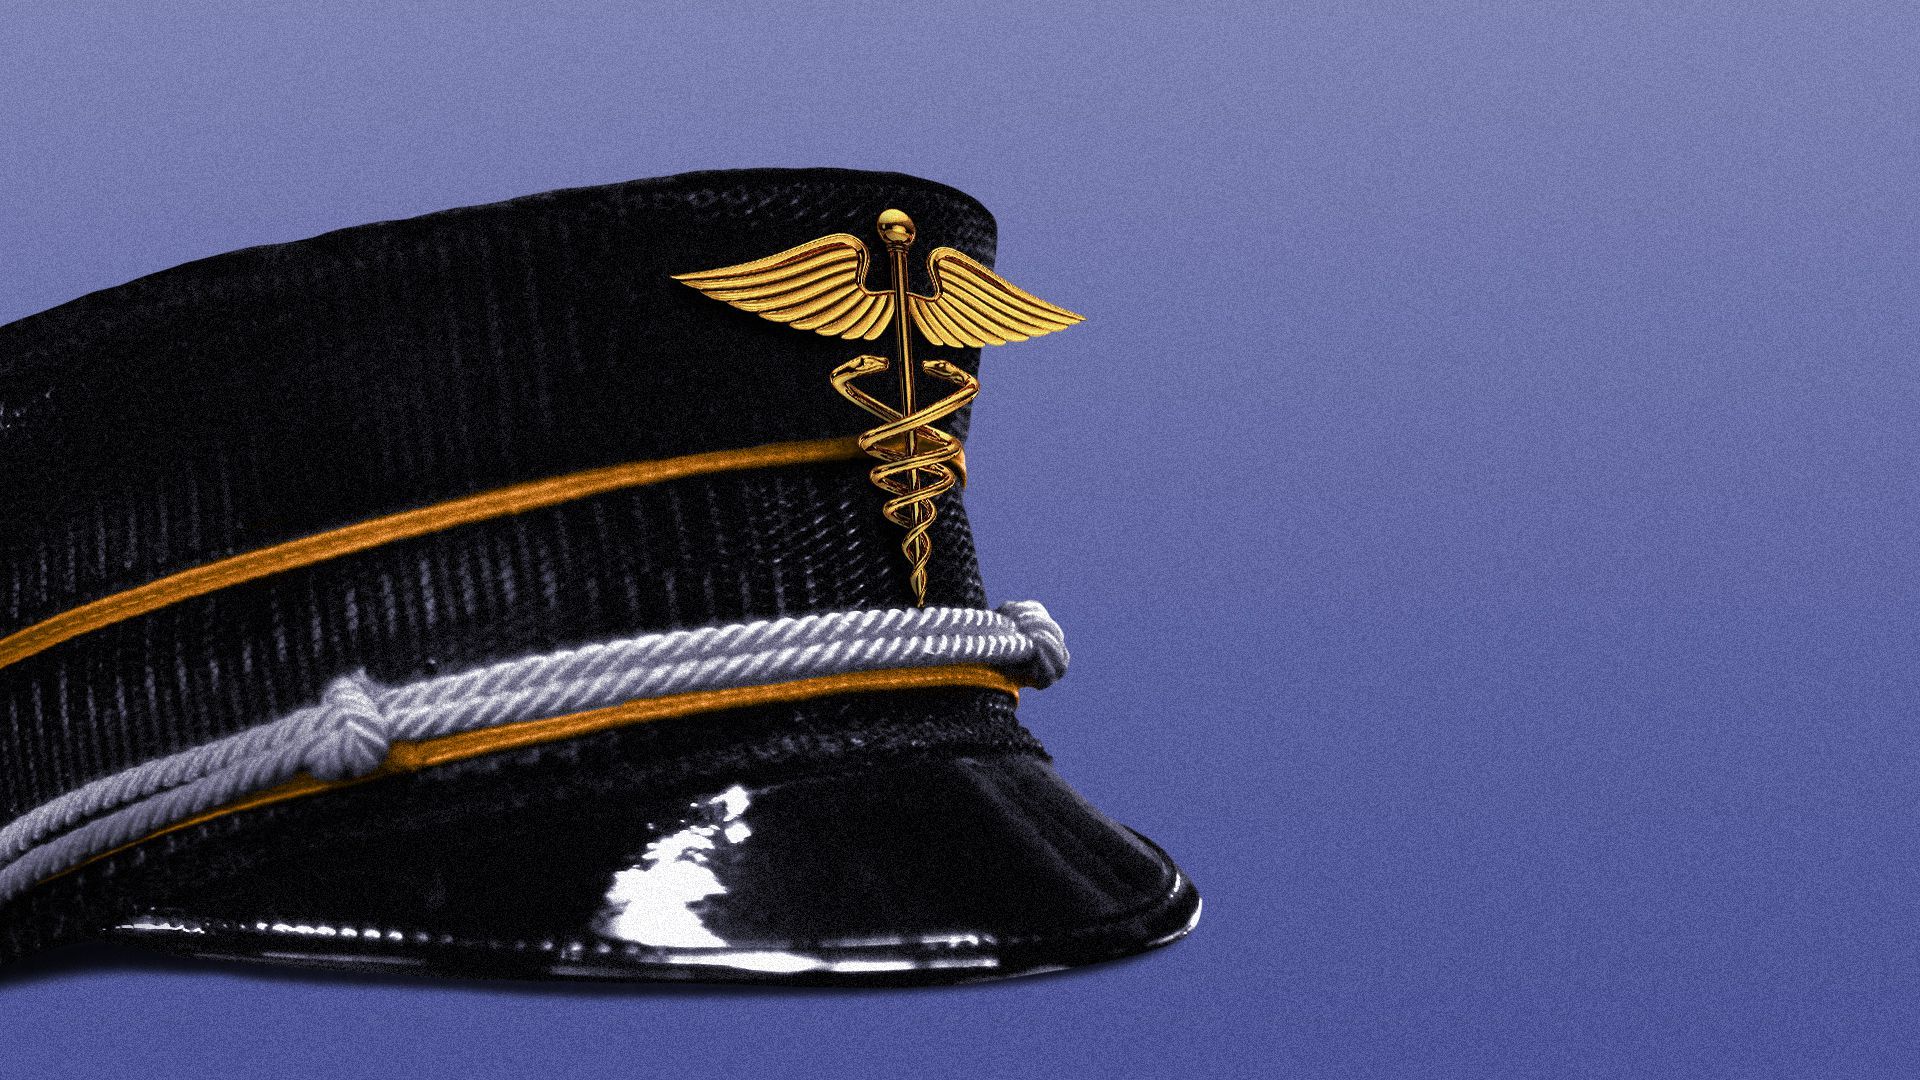 Illustration of a caduceus on a train conductor's hat.